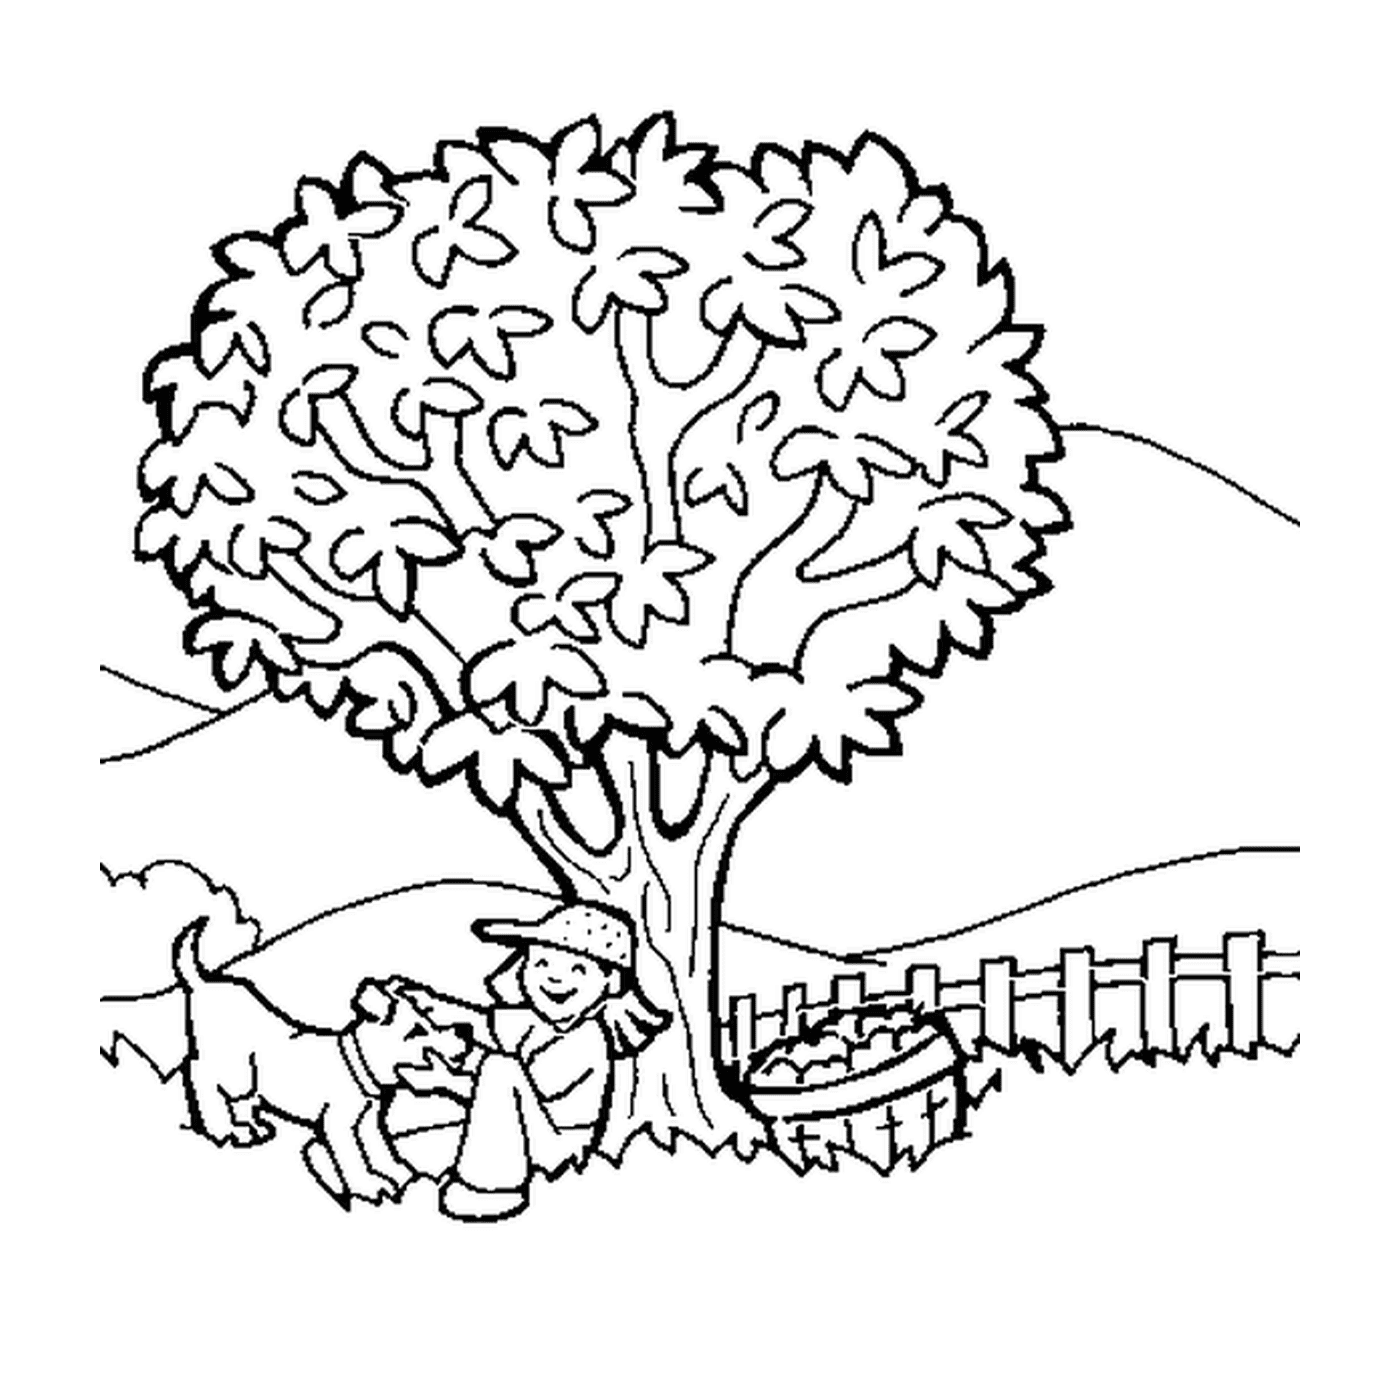  An apple tree with a dog 